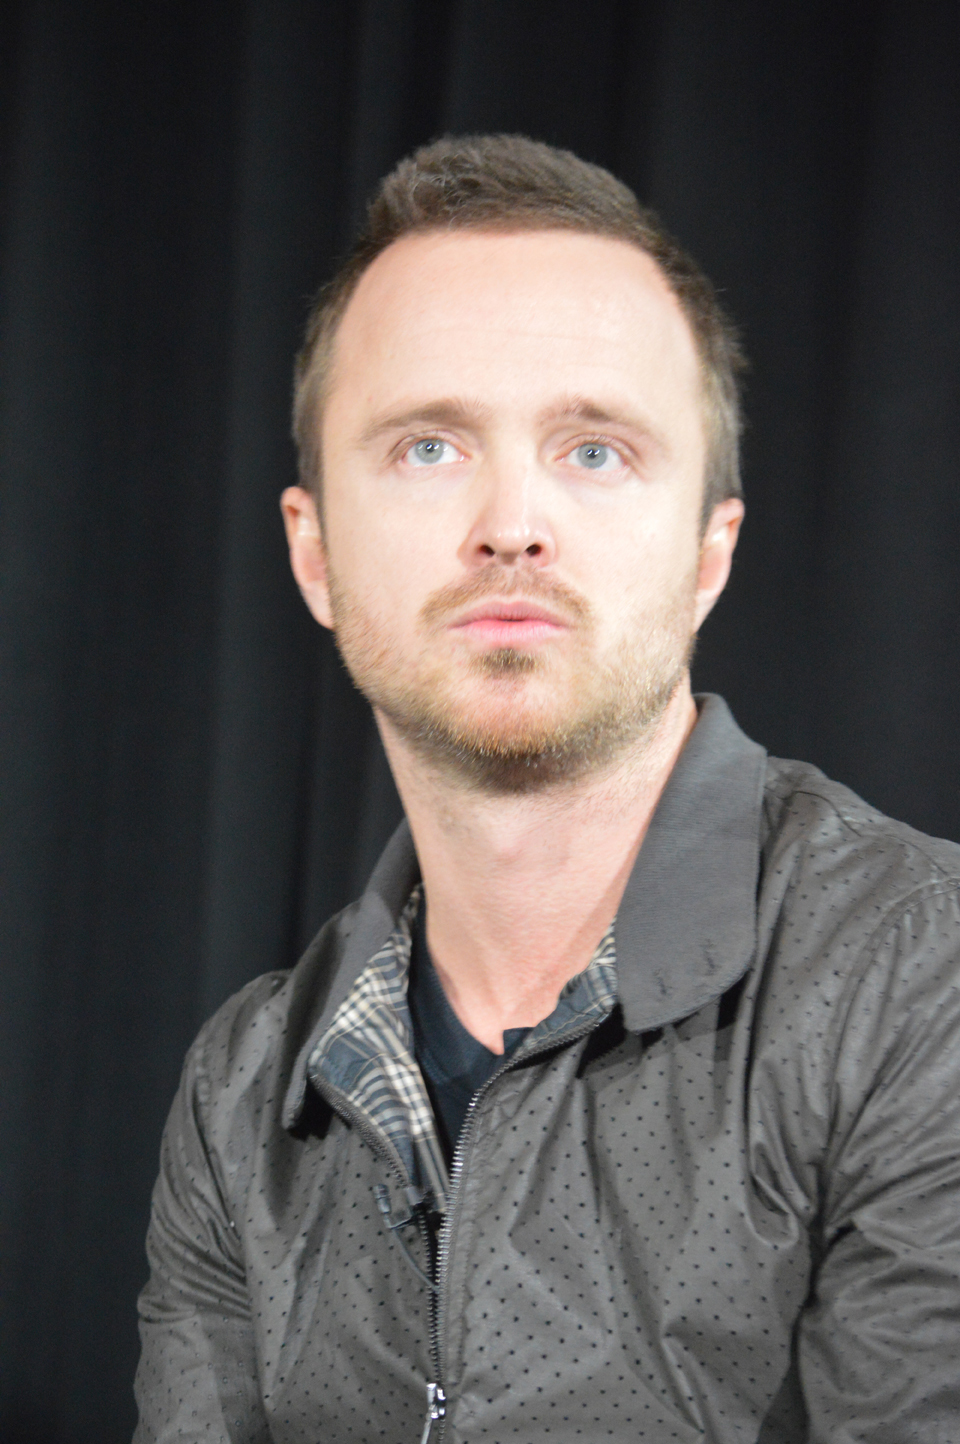 Aaron Paul at event of Need for Speed. Istroske greicio (2014)